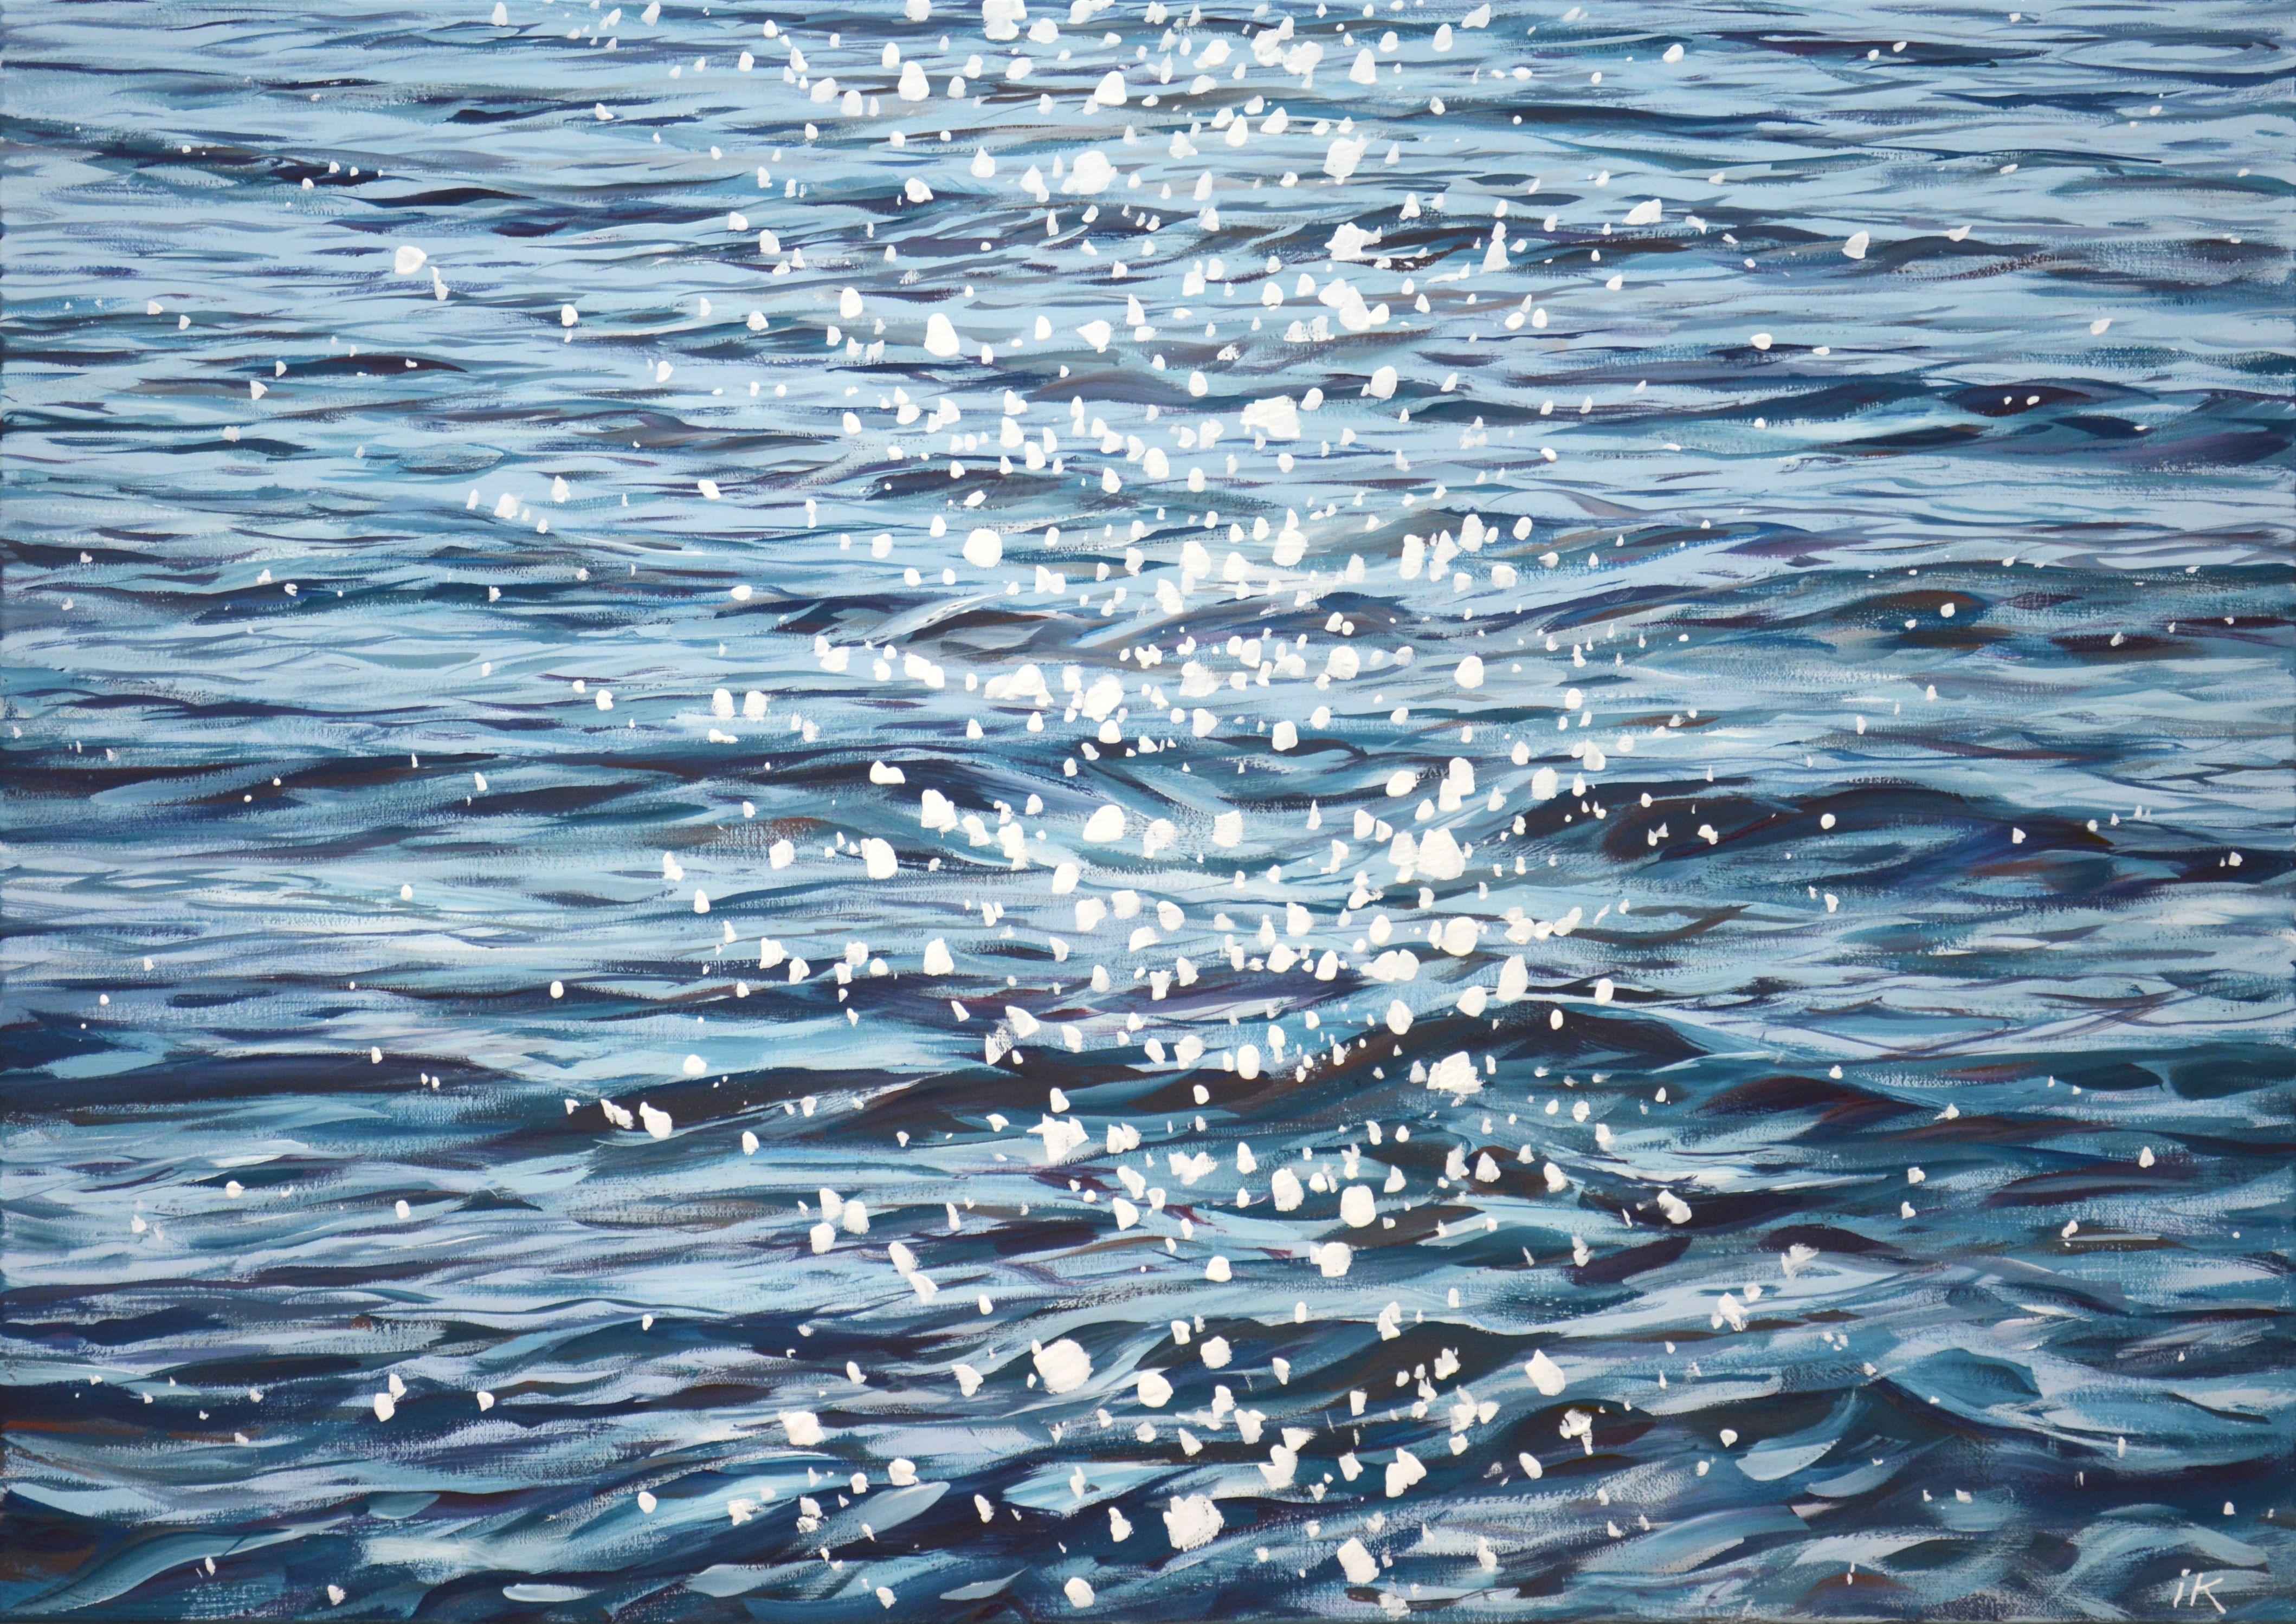 Silver placer. Blue water, waves, serene views, ocean shine, glare on the water create an atmosphere of relaxation, romance. Made in the style of realism. Part of a permanent series of seascapes. The picture is of good quality, the colors make